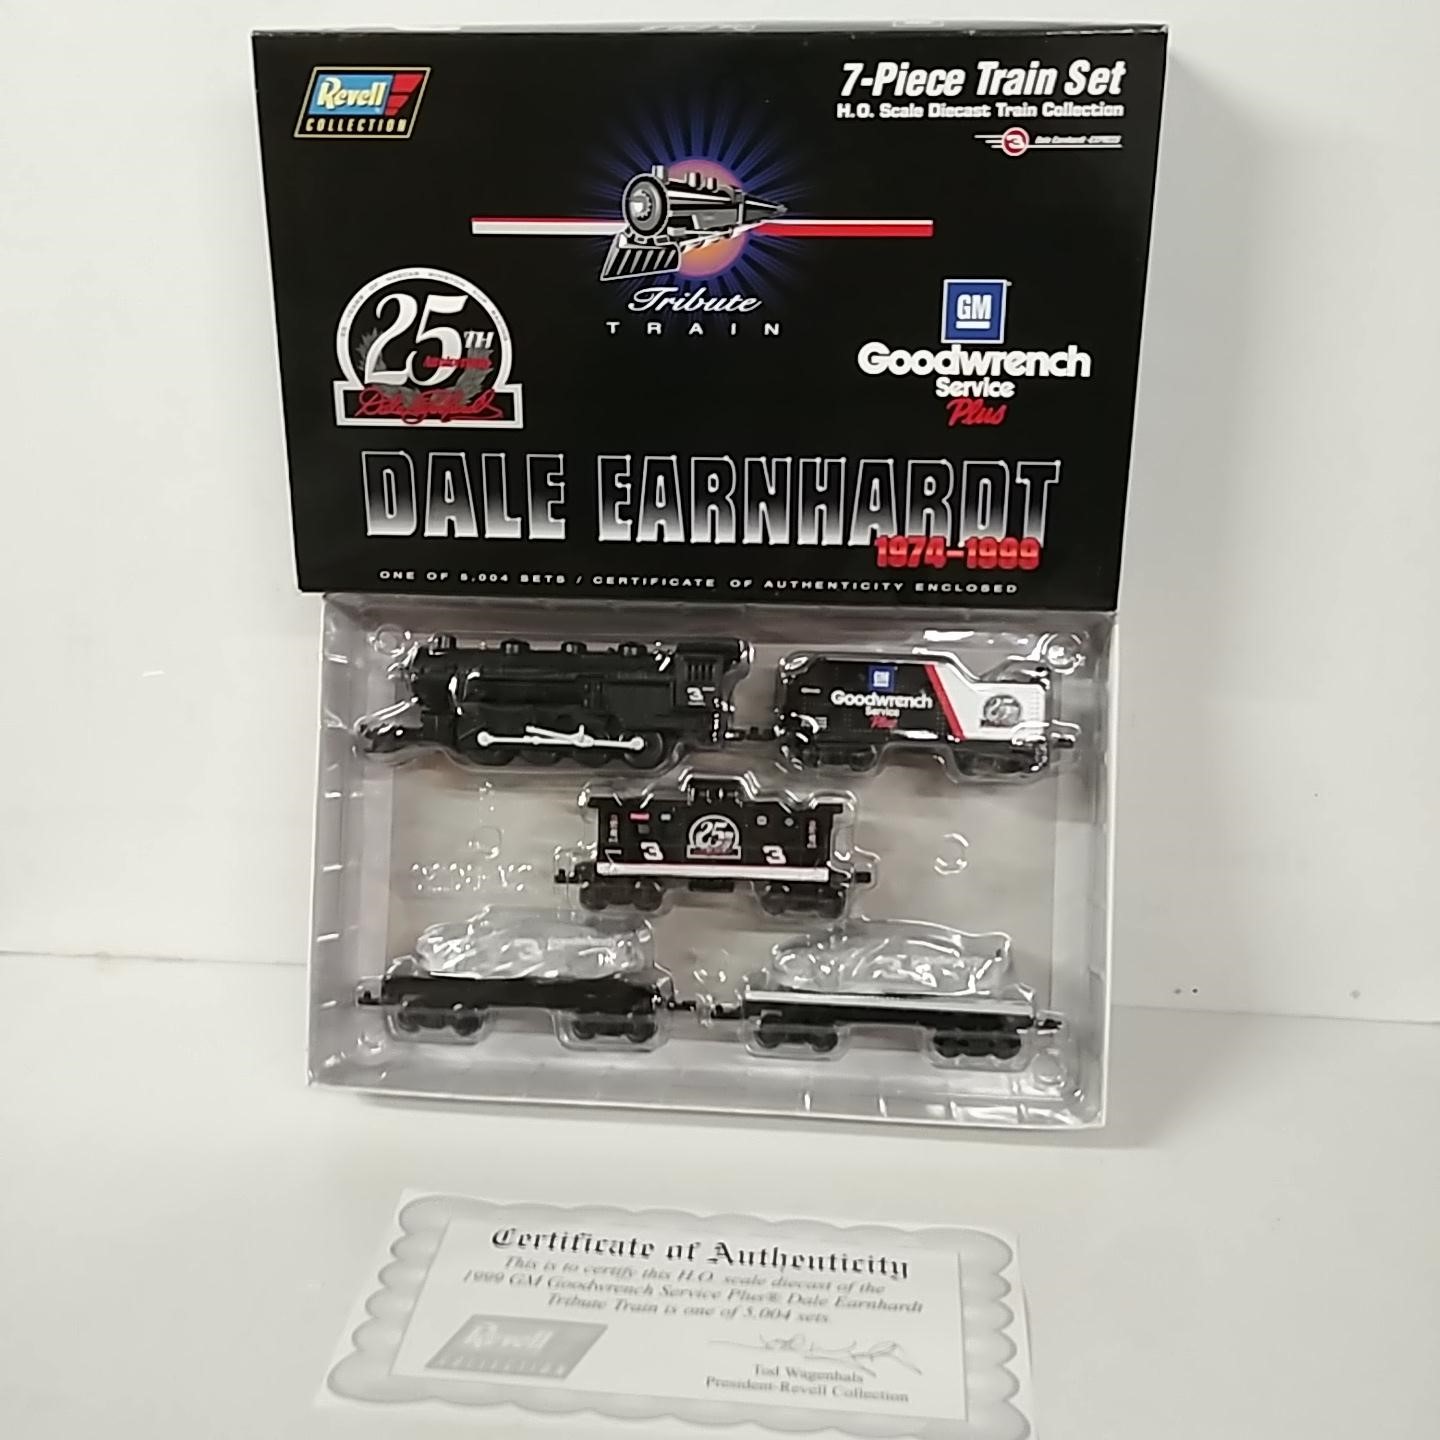 1999 Dale Earnhardt 1/64th Goodwrench "25th Annivesary" train set